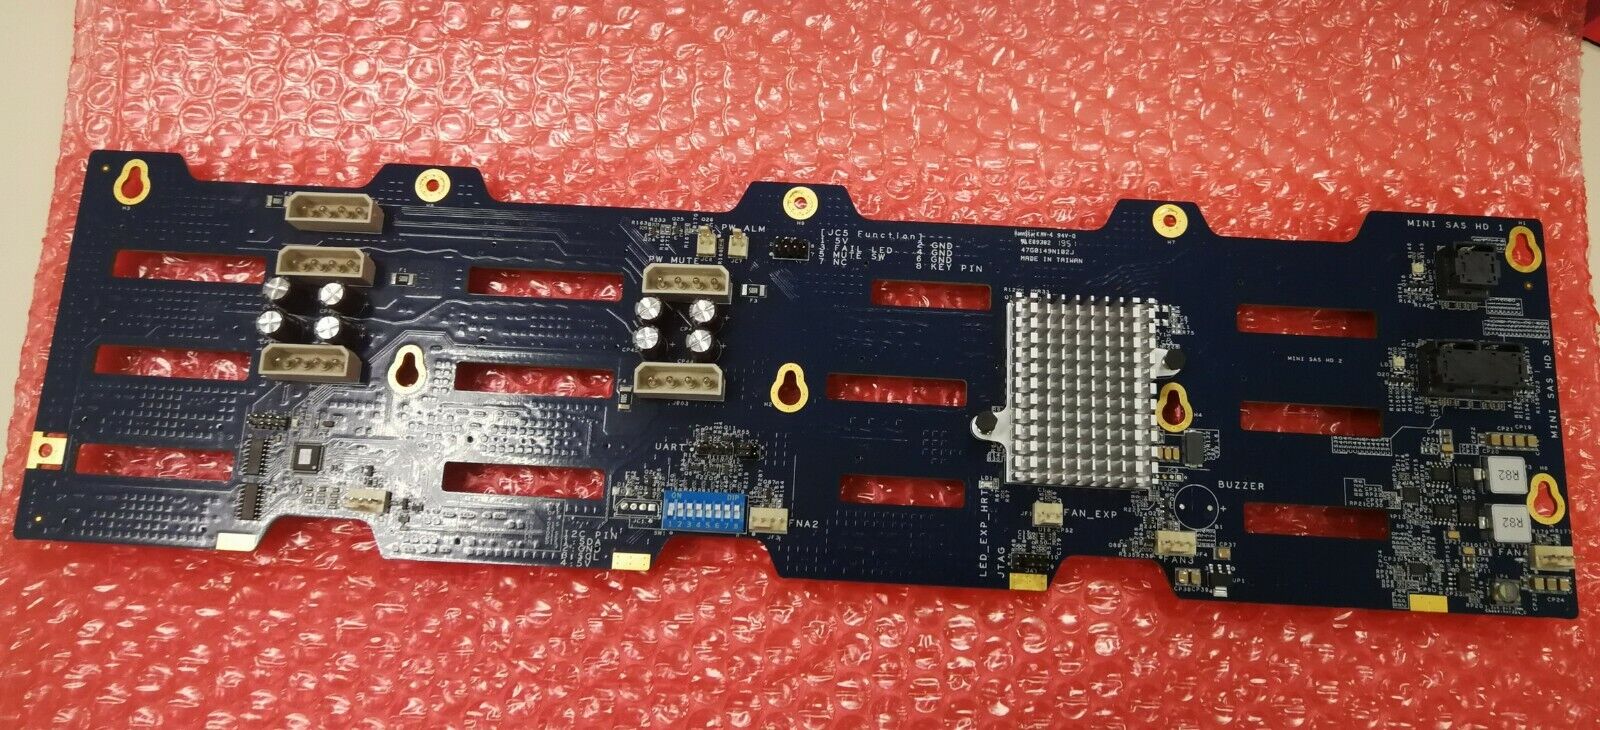 New 380-31610-3009A0 12G backplane for RM31616 chassis by Chenbro, with Expander